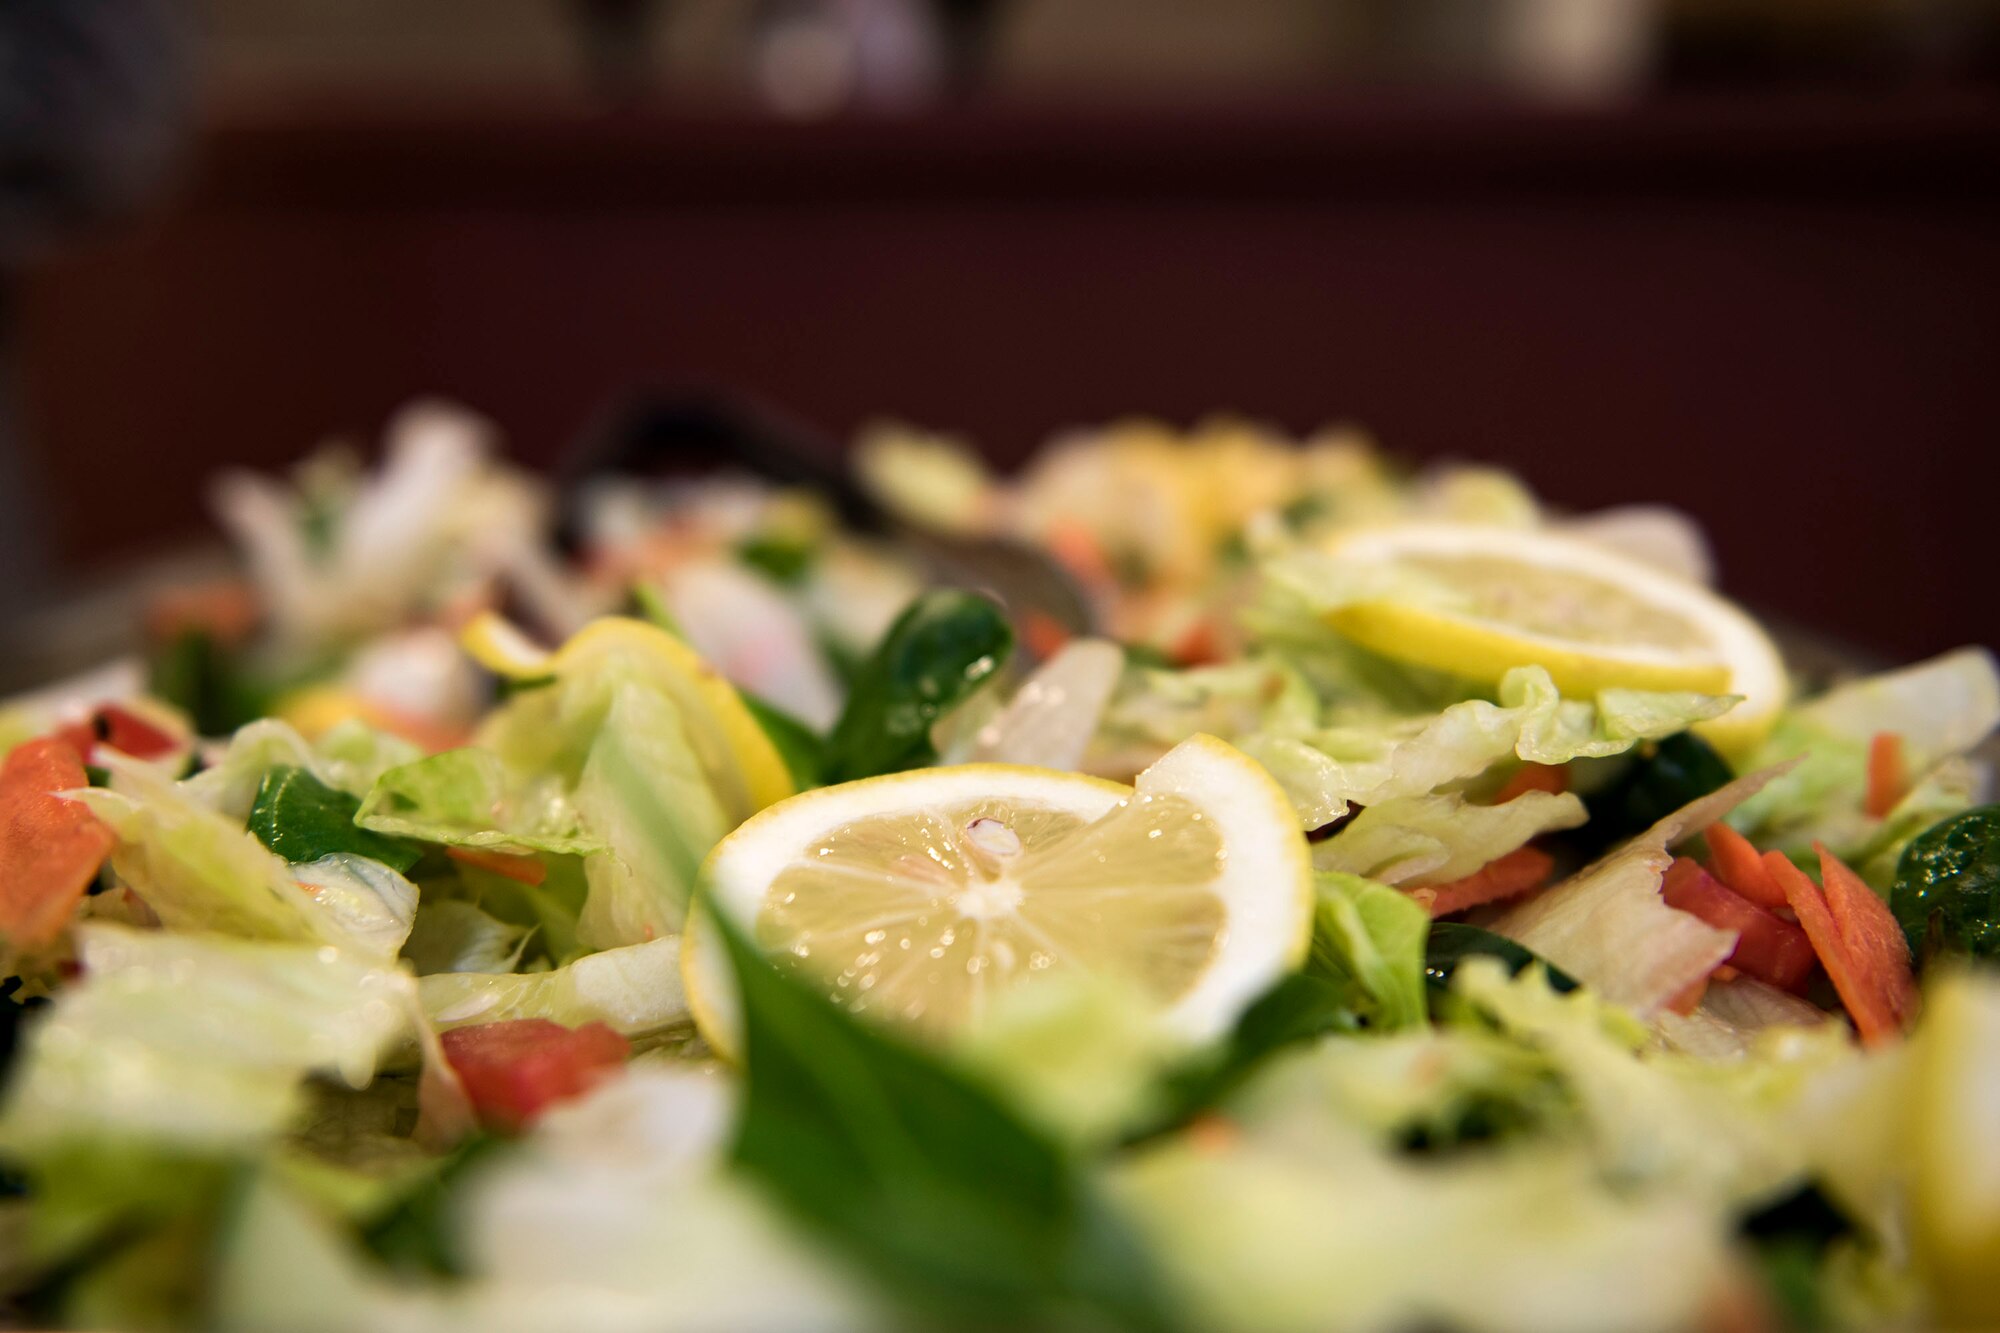 A tray of salad rests on a table during a deployed spouse dinner, April 23, 2019, at Moody Air Force Base, Ga. The dinner served as an opportunity for the families of deployed members to bond and provide relief. The mission’s success depends on resilient Airmen and families, who are prepared to make sacrifices with the support of their fellow Airmen, local communities and leadership. (U.S. Air Force photo by Senior Airman Erick Requadt)